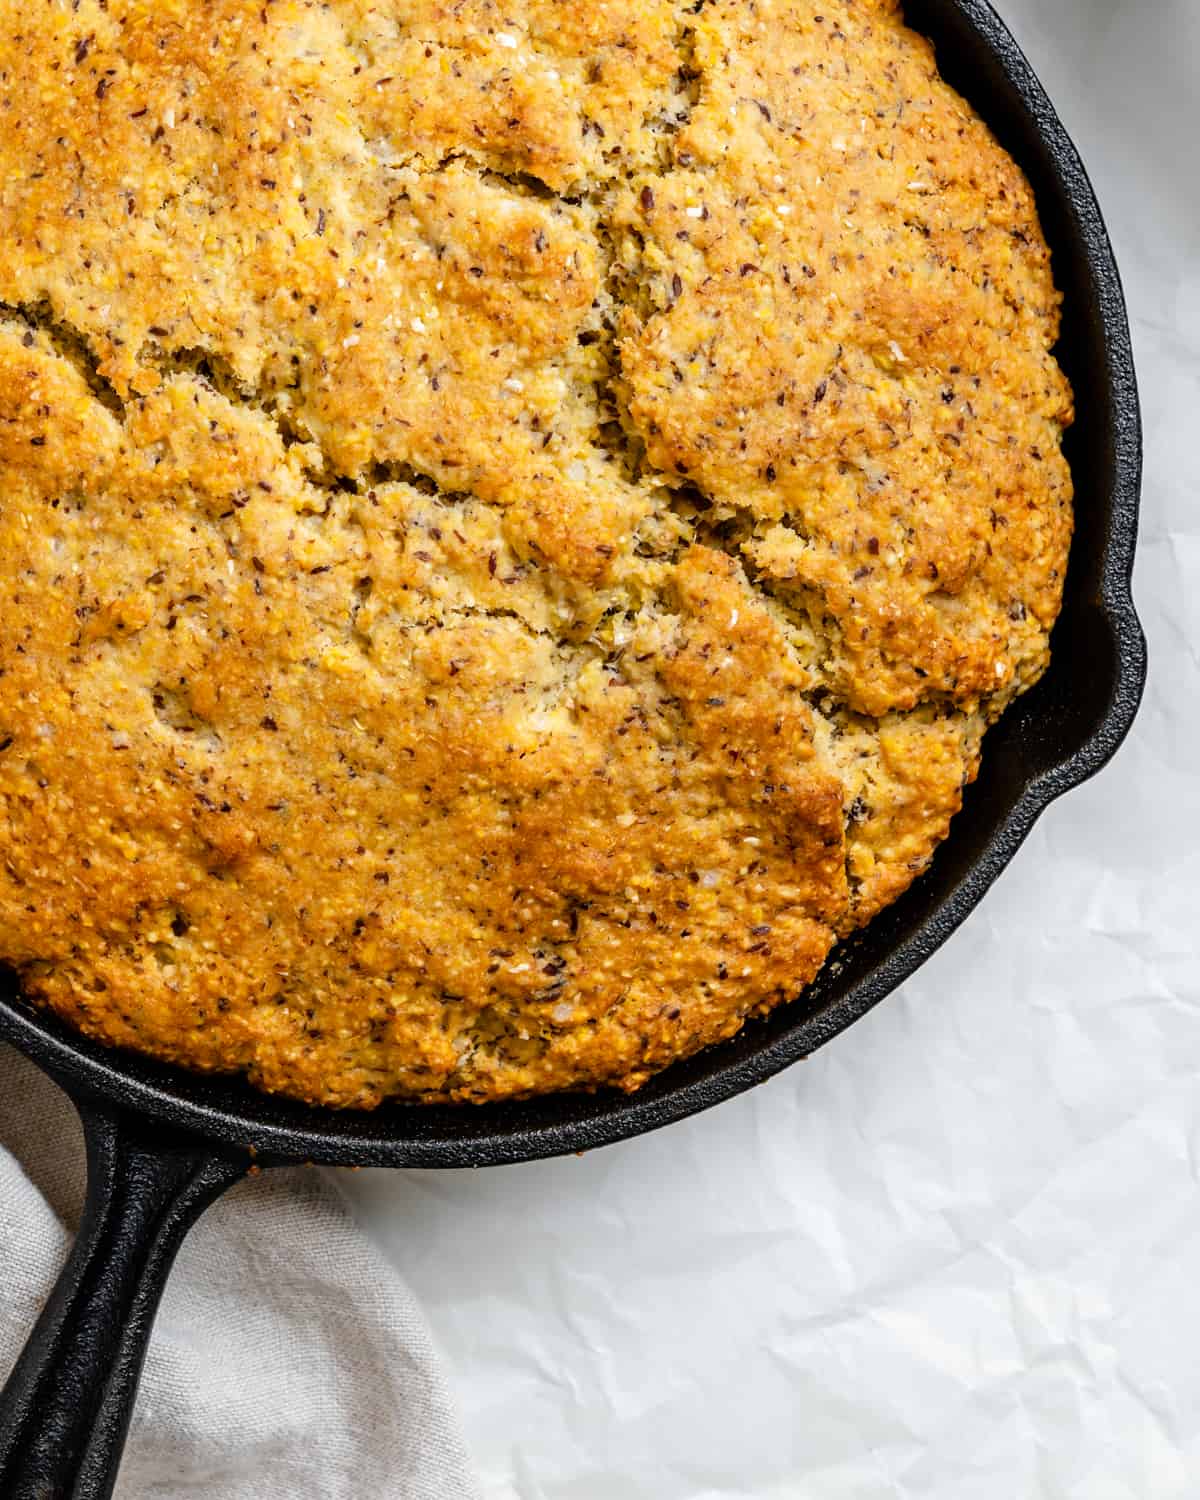 completed Vegan Cornbread Recipe in a Cast Iron Skillet against a white background